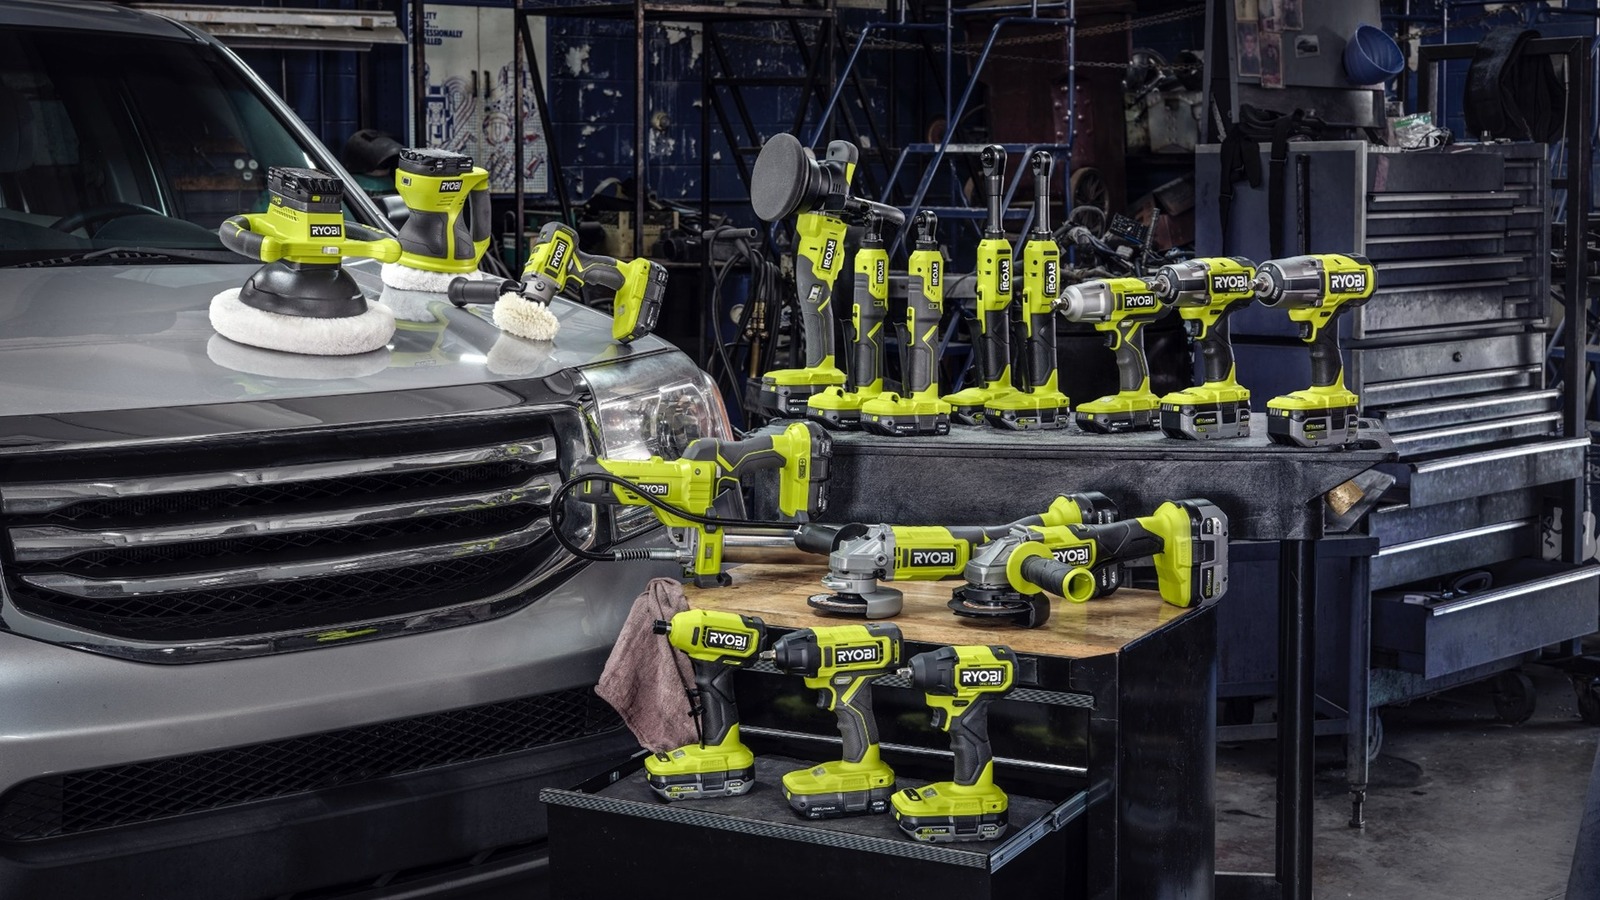 5 Cheap Ryobi Substitutes If You're Shopping For Power Tools